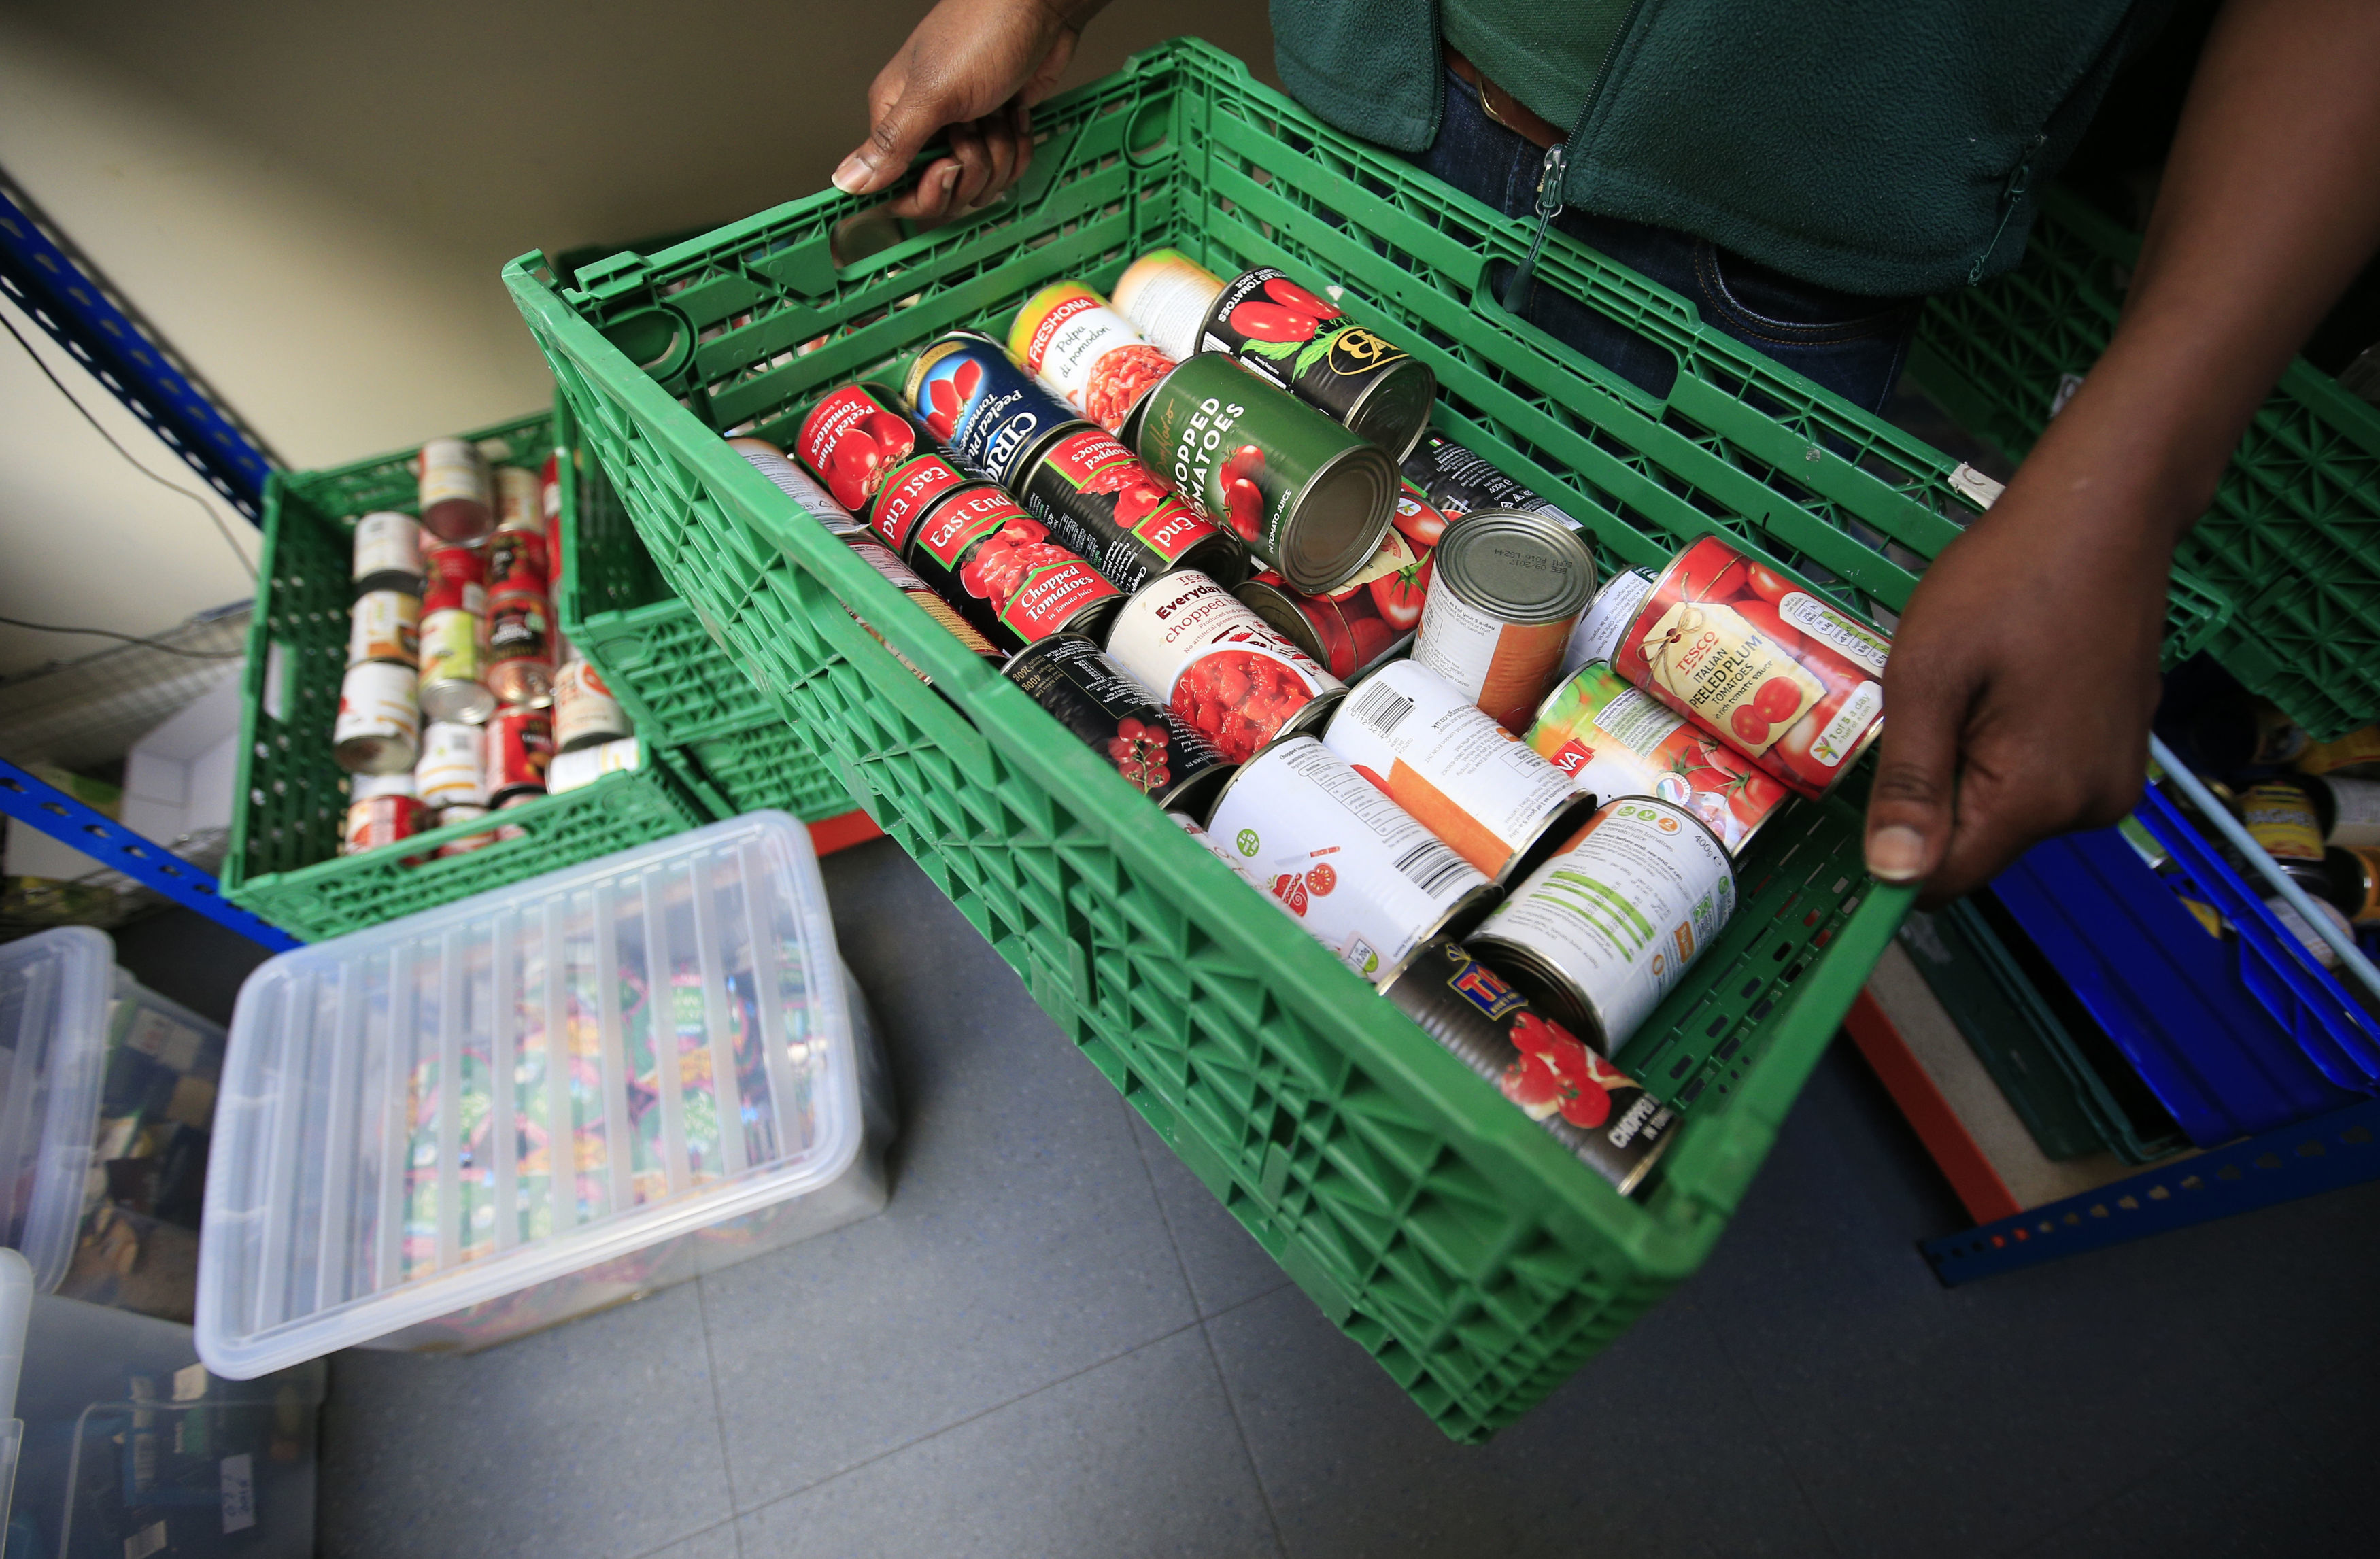 13% of Scots surveyed in a recent charity report said they are worried they may have to rely on food banks this Christmas.